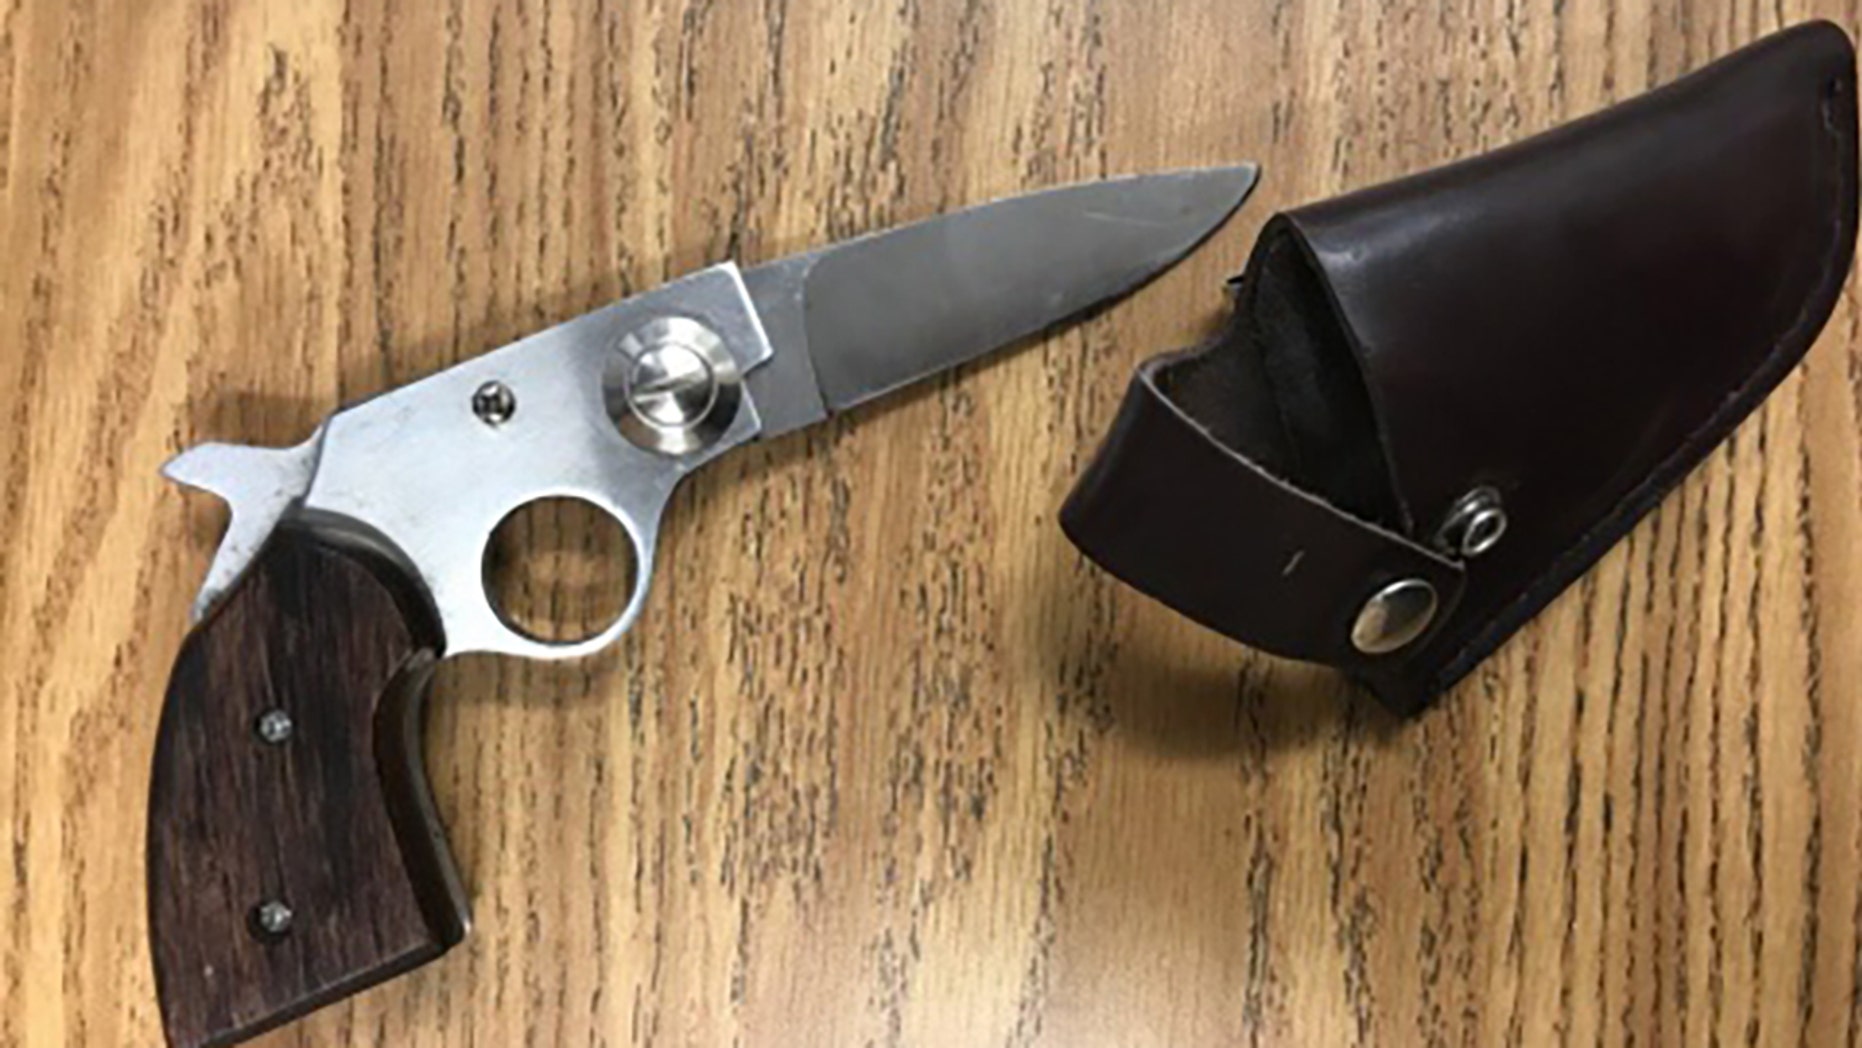 A Florida high school student brandished a gun-shaped knife during a fight, police say.